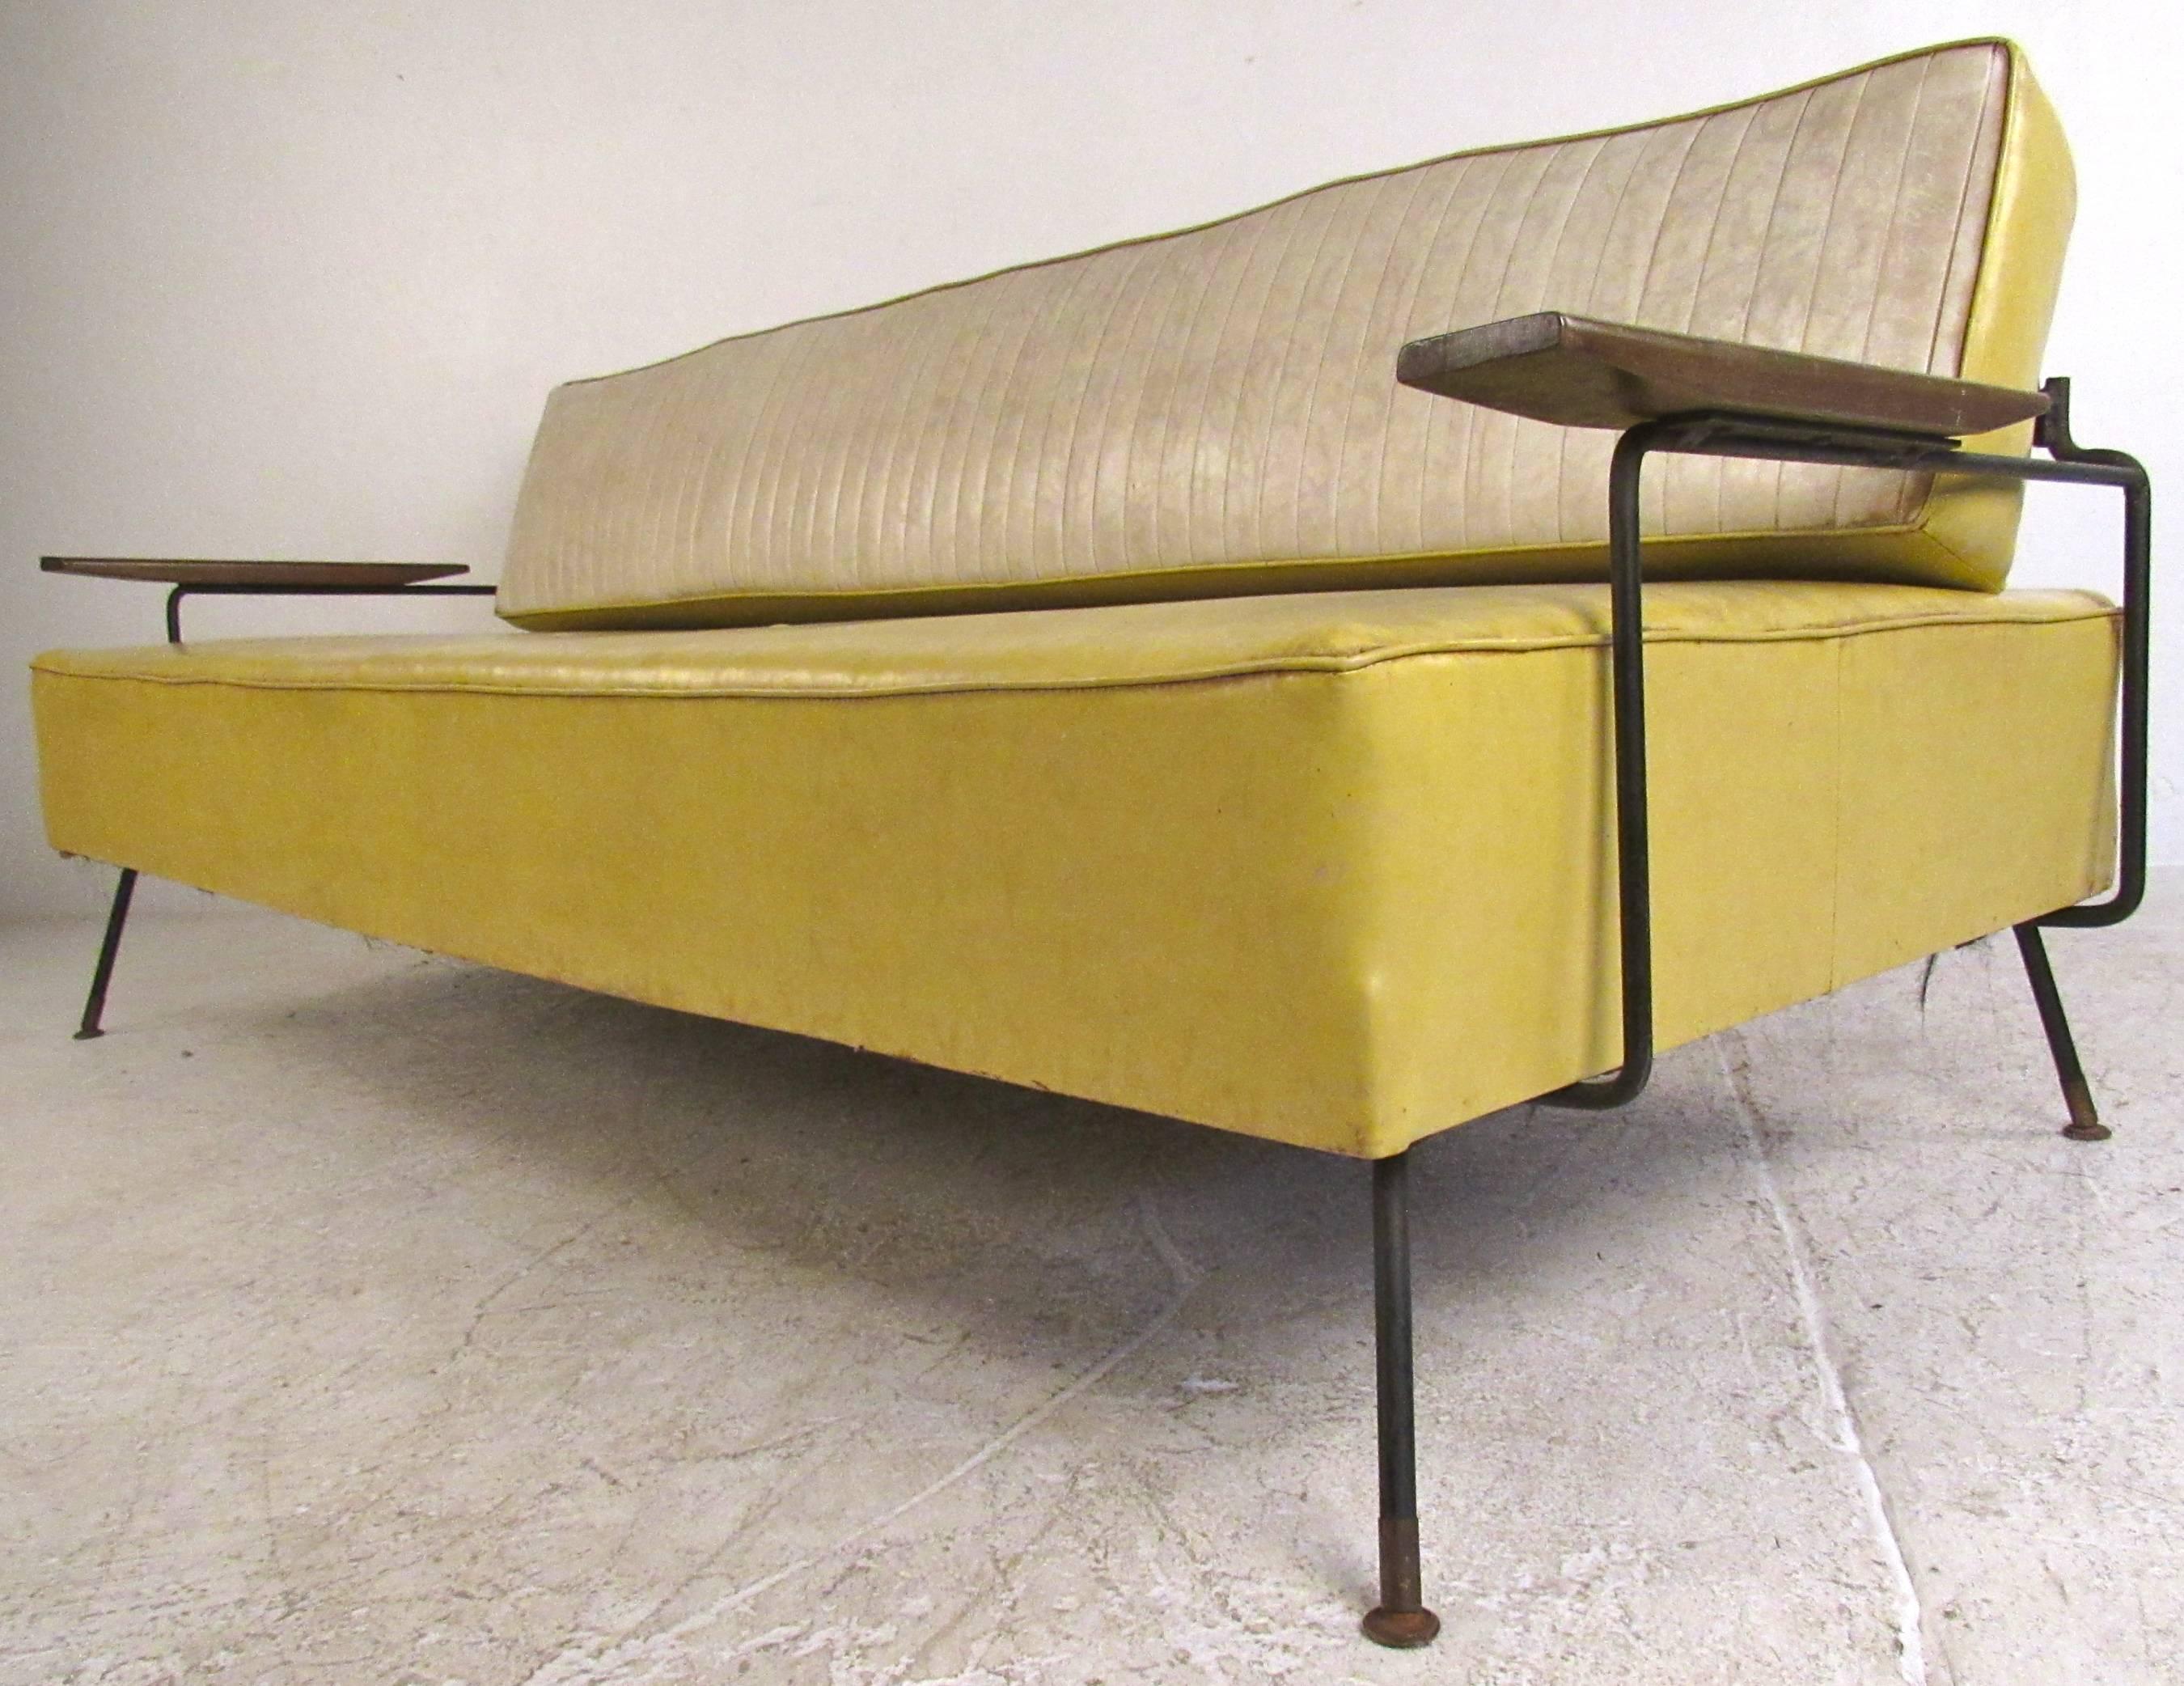 This unique vintage daybed features durable vinyl covering with cast iron frame. Spacious seating area expands even further with hinged seat back. Wooden armrests and fluted vinyl add to the midcentury charm of the sofa. Manufactured by Selrite,